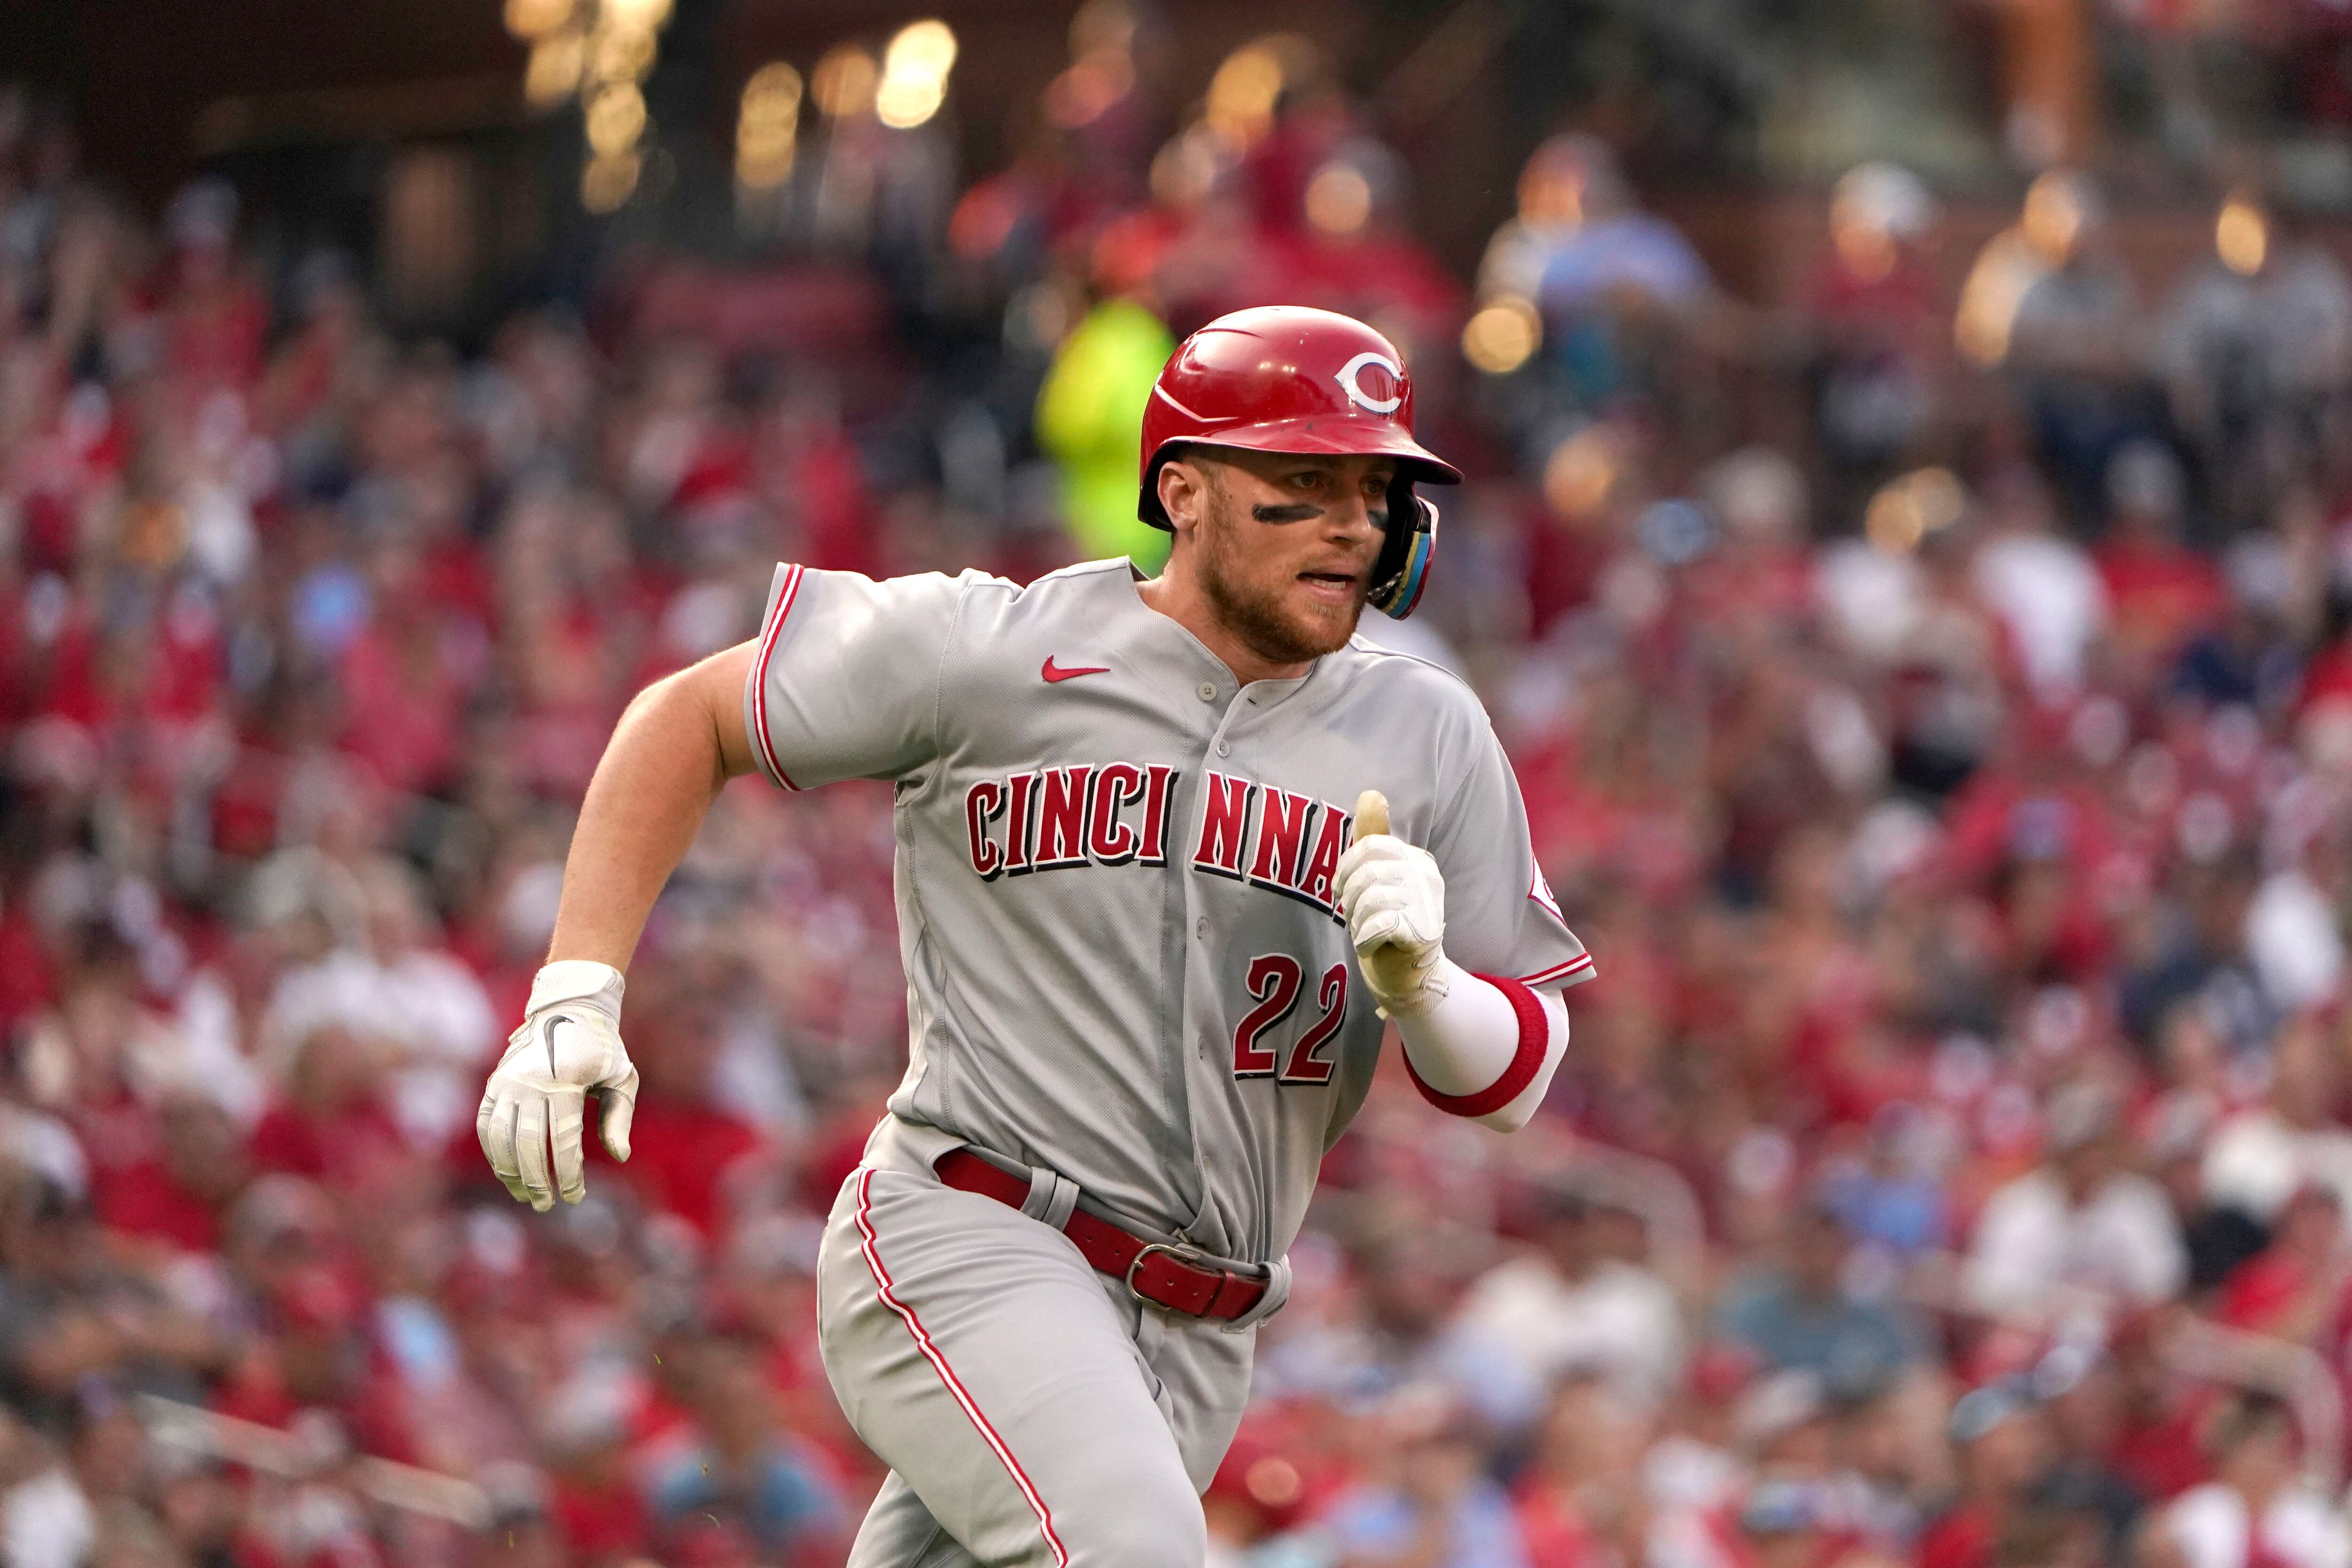 Kyle Farmer talks about breaking out of slump with homer in Reds win